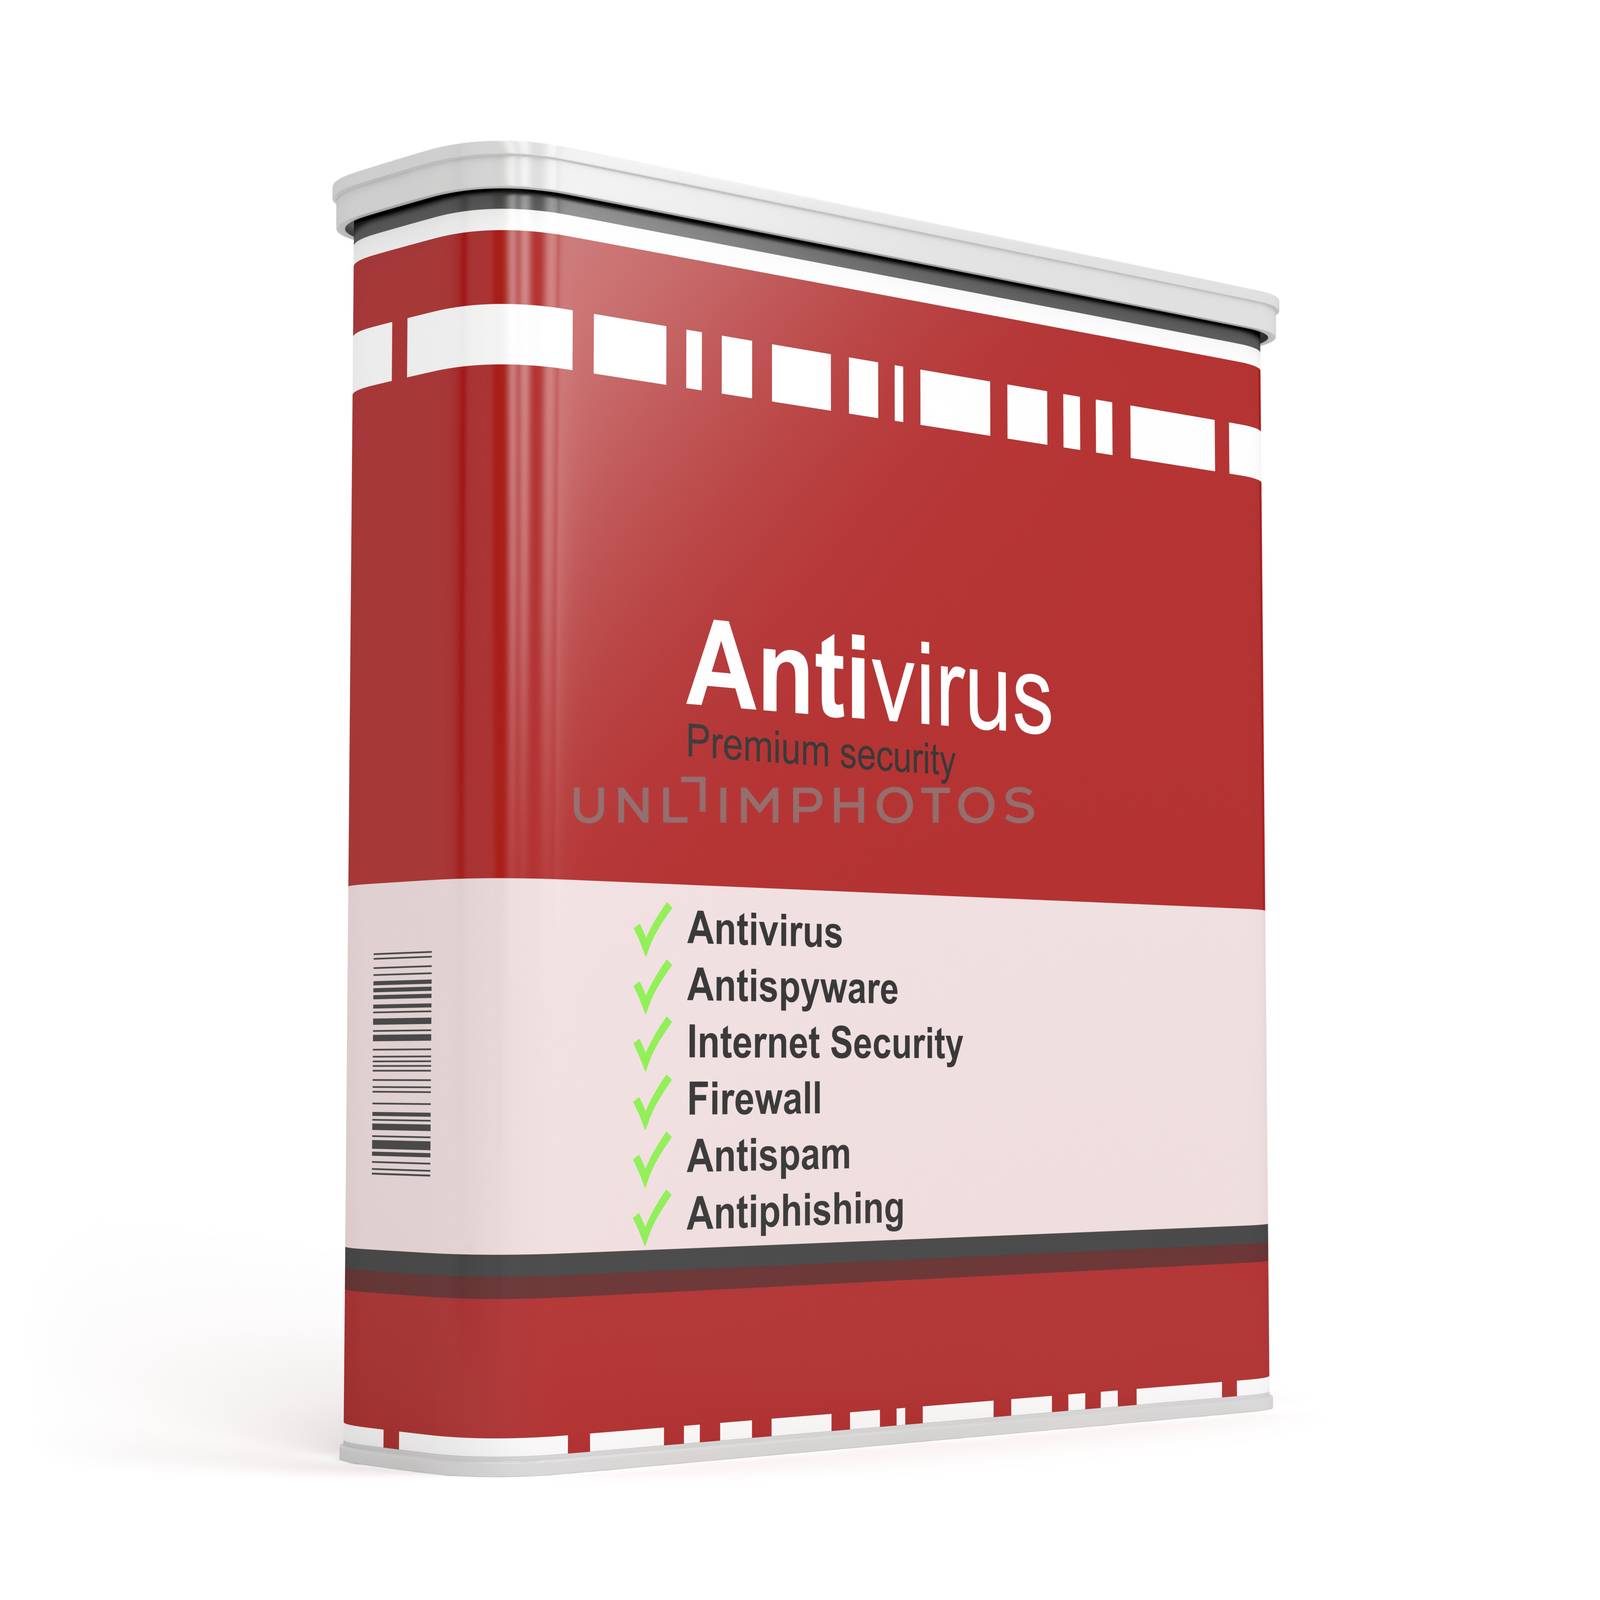 Antivirus software by magraphics